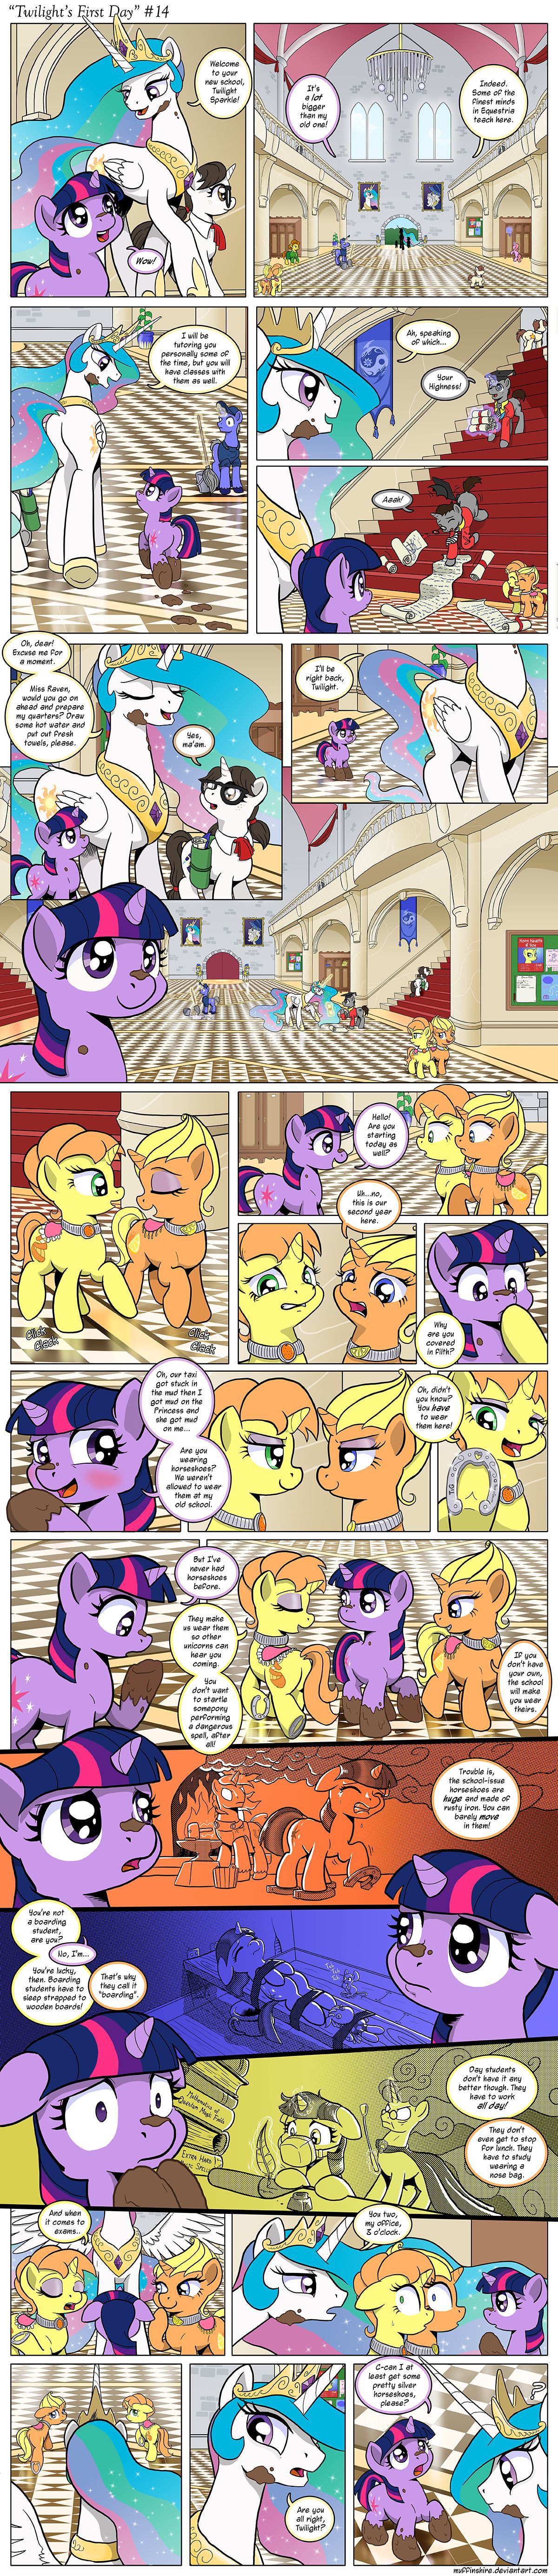 [Muffinshire] Twilight's First Day (My Little Pony: Friendship is Magic) [English] 14